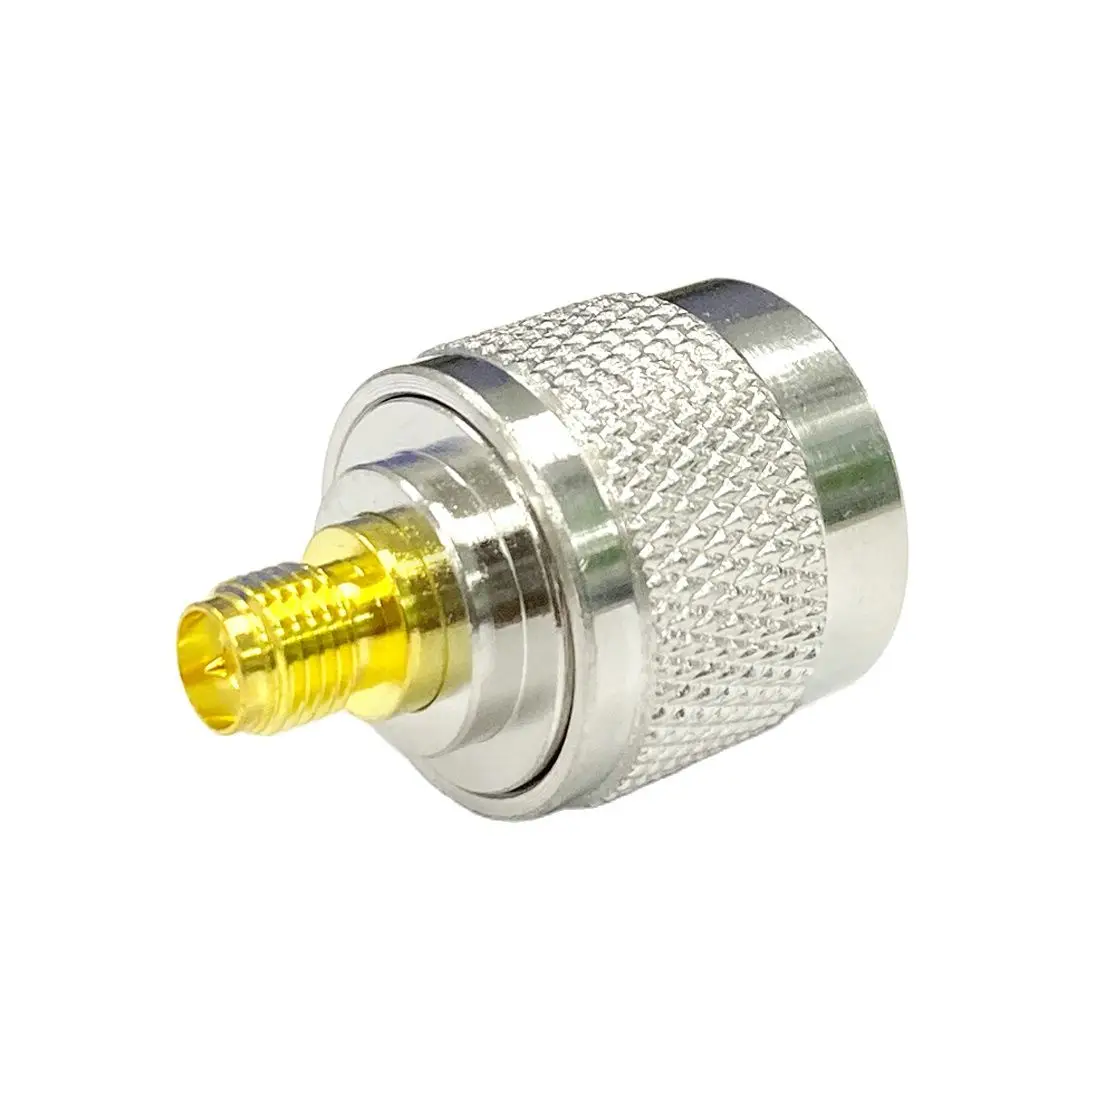 1PC N Type Male Plug  To RP-SMA  Female Jack Inner Pin RF Coax Adapter Straight  Goldplated  NEW Wholesale SMA TO N Convertor